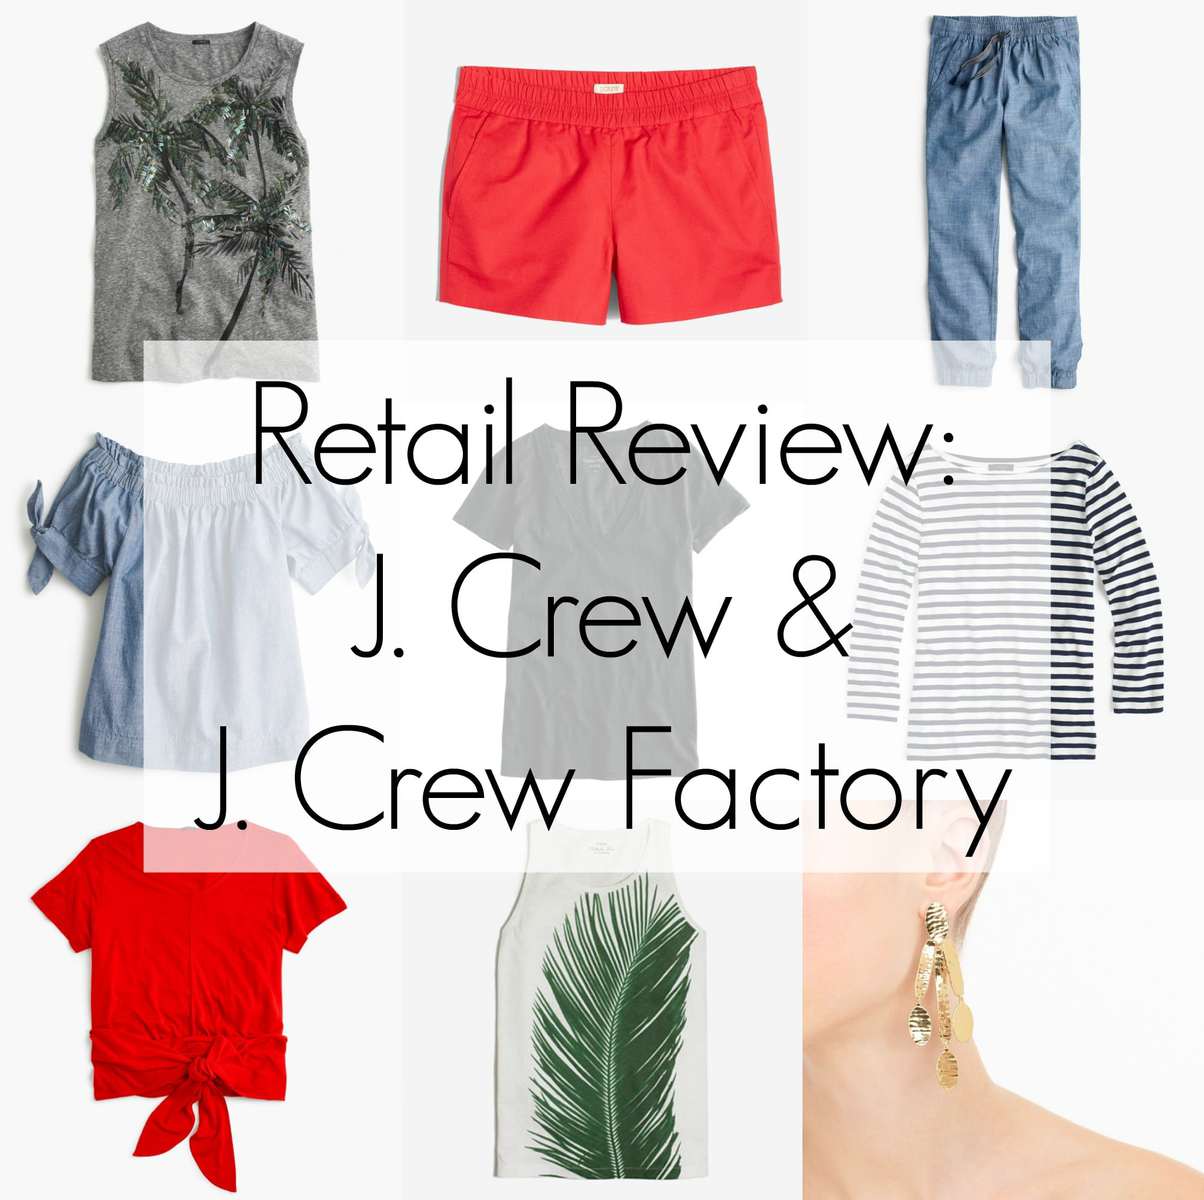 Shopping Hits and Misses: J. Crew and J. Crew Factory